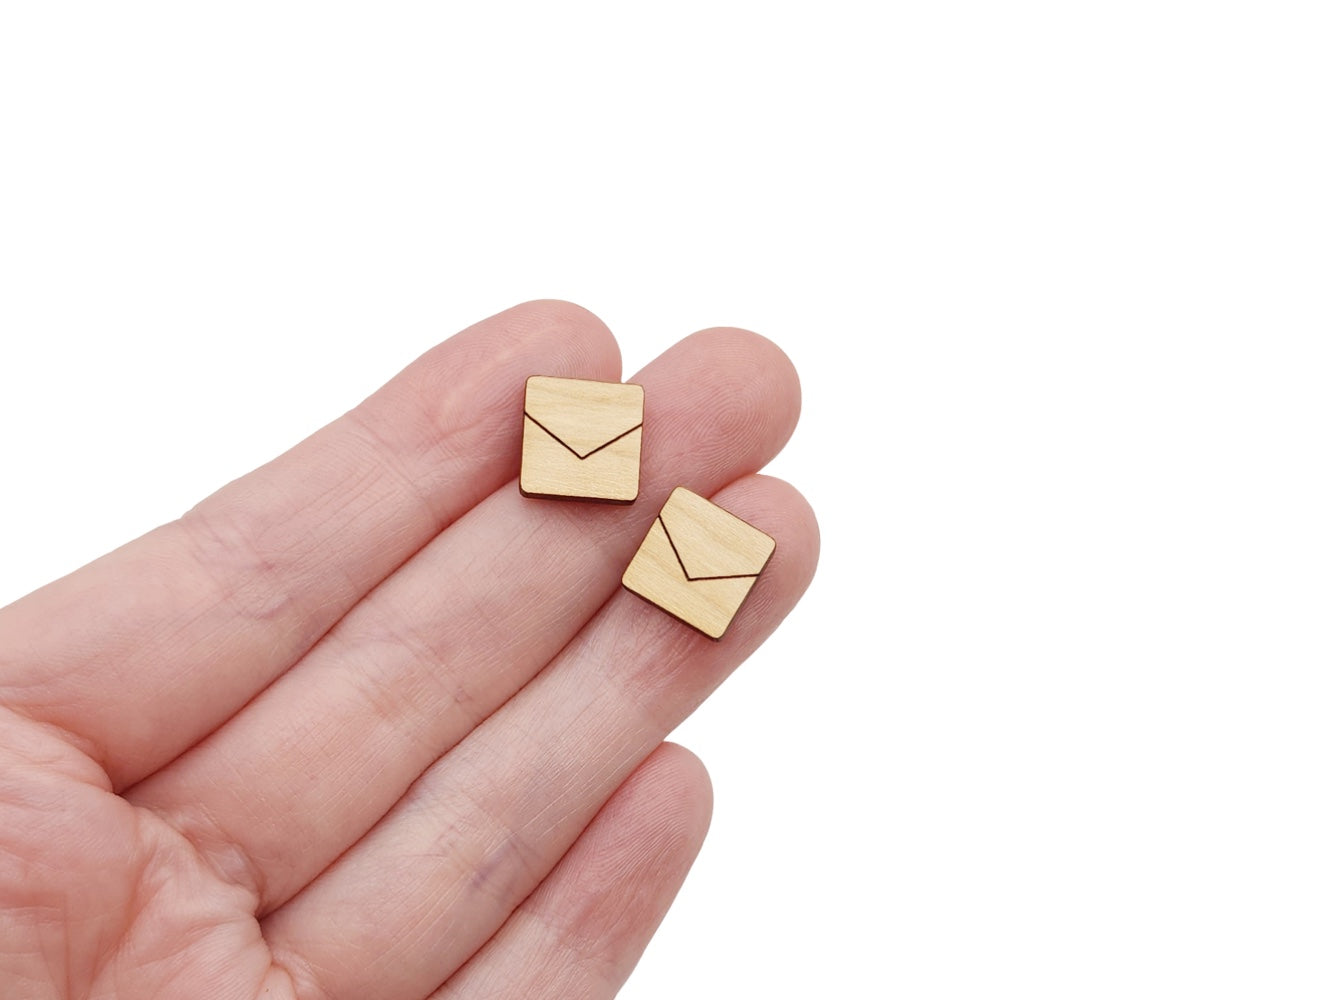 a hand holding a pair of wooden cabochon stud earring blanks cut in a square shape and engraved with a chevron line